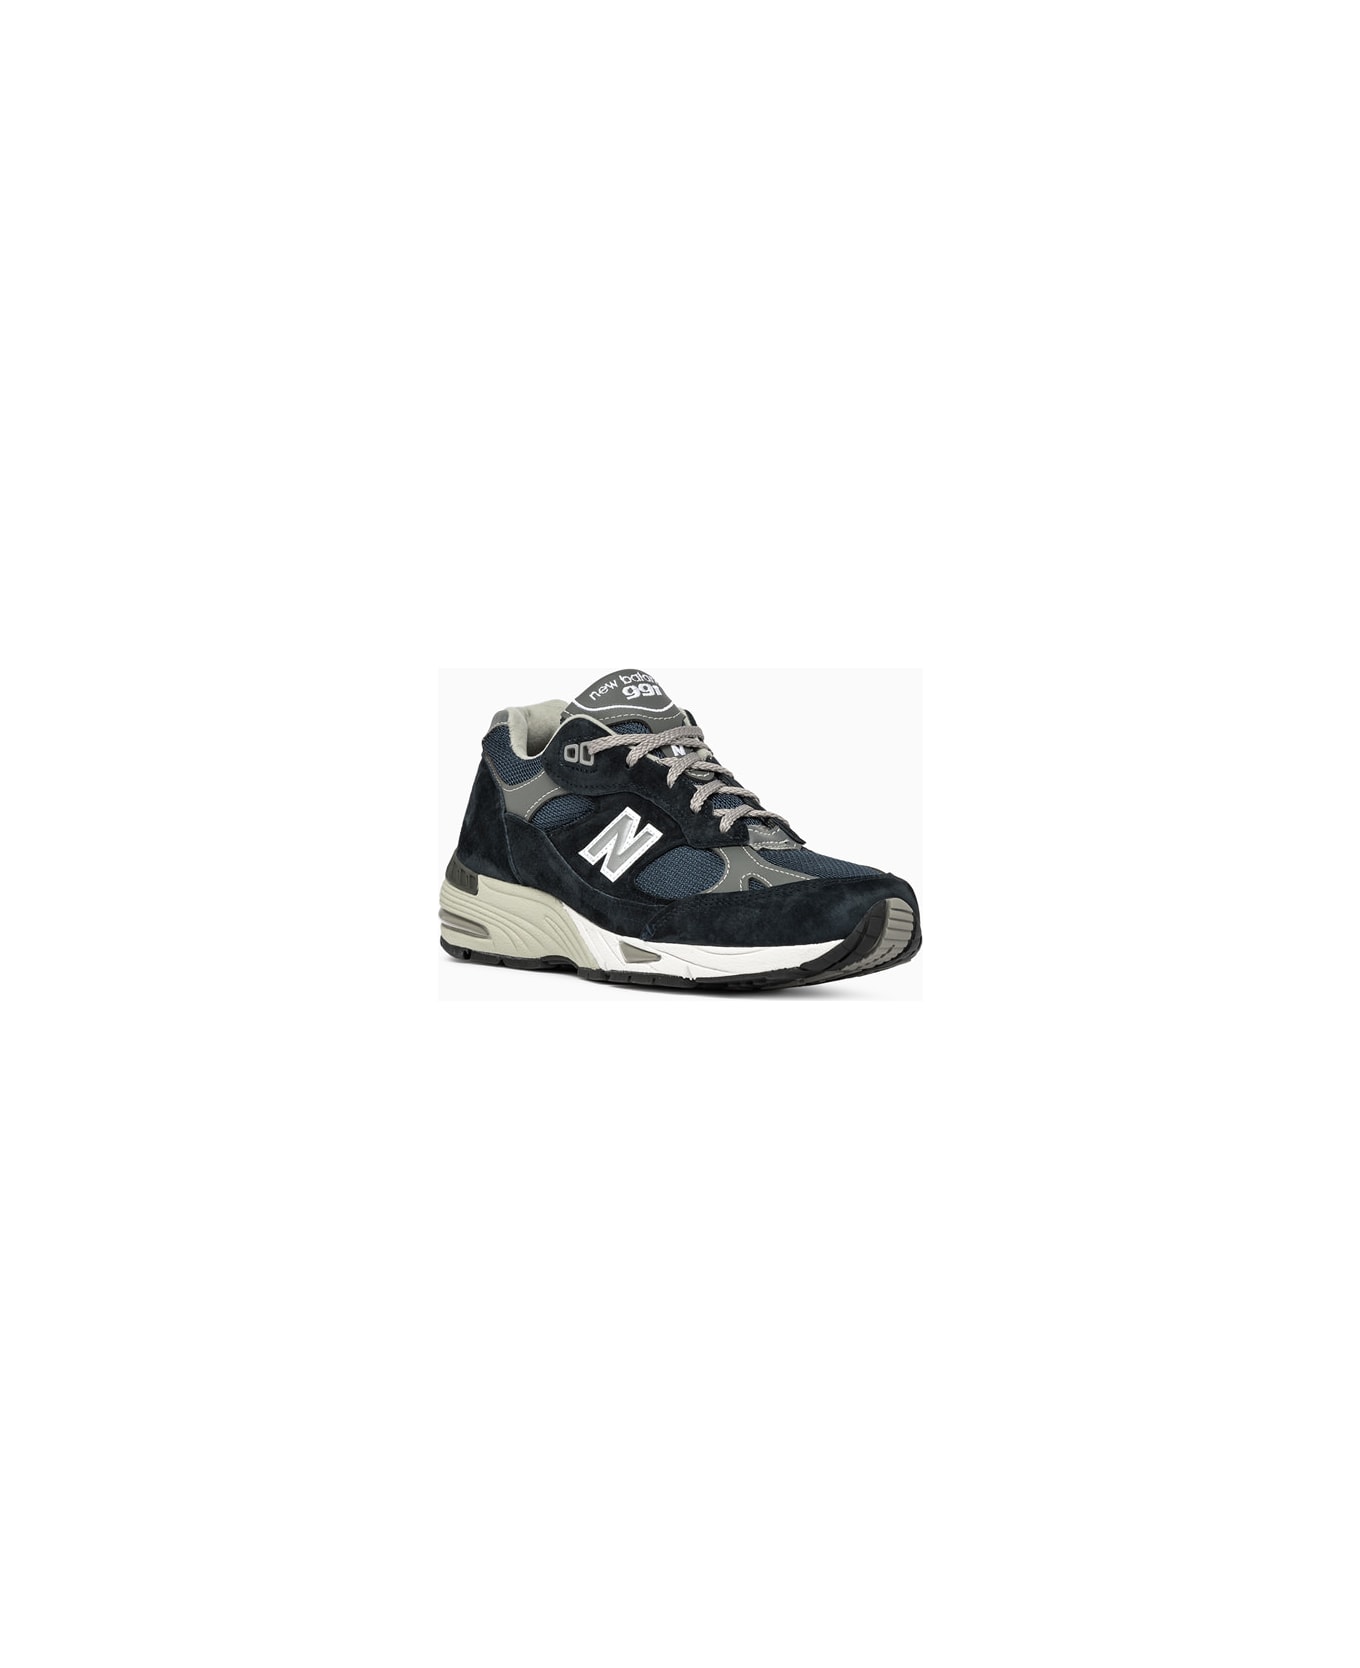 New Balance 991v1 Made In Uk Sneakers W991nv - Navy